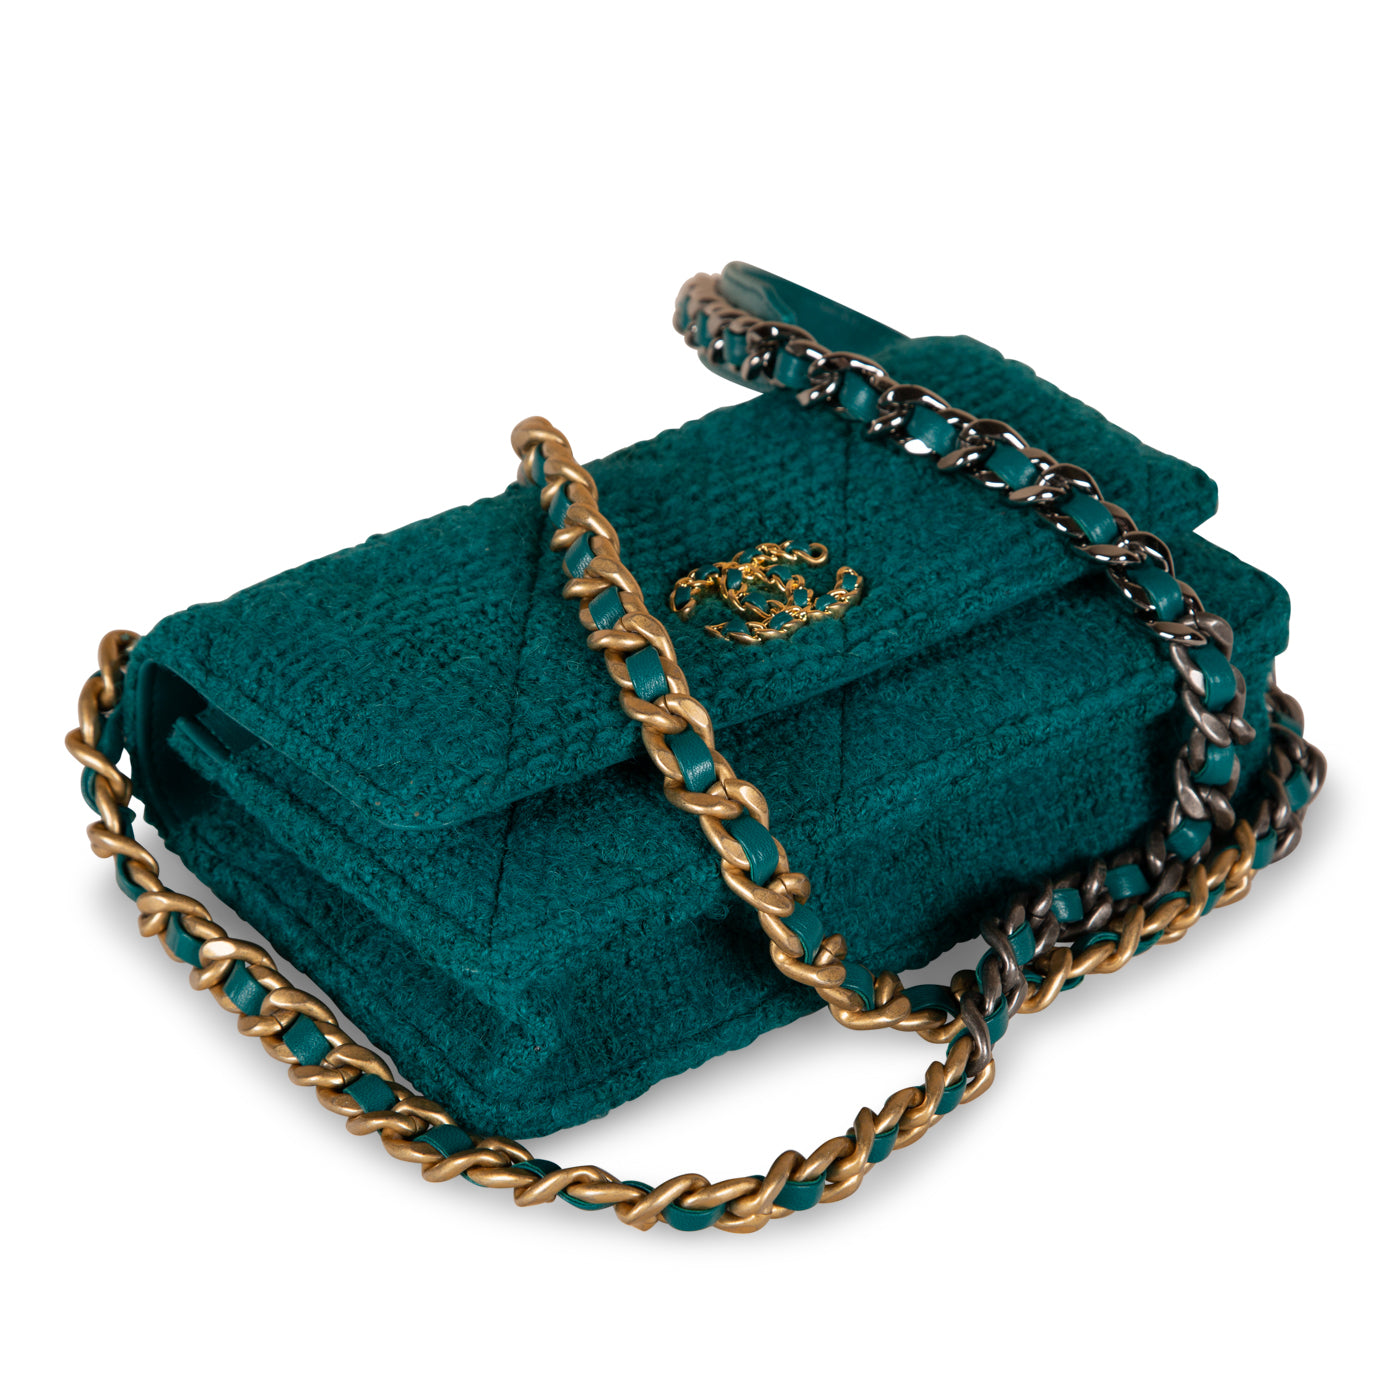 Chanel - Chanel 19 WOC with Coin Purse - Green Tweed